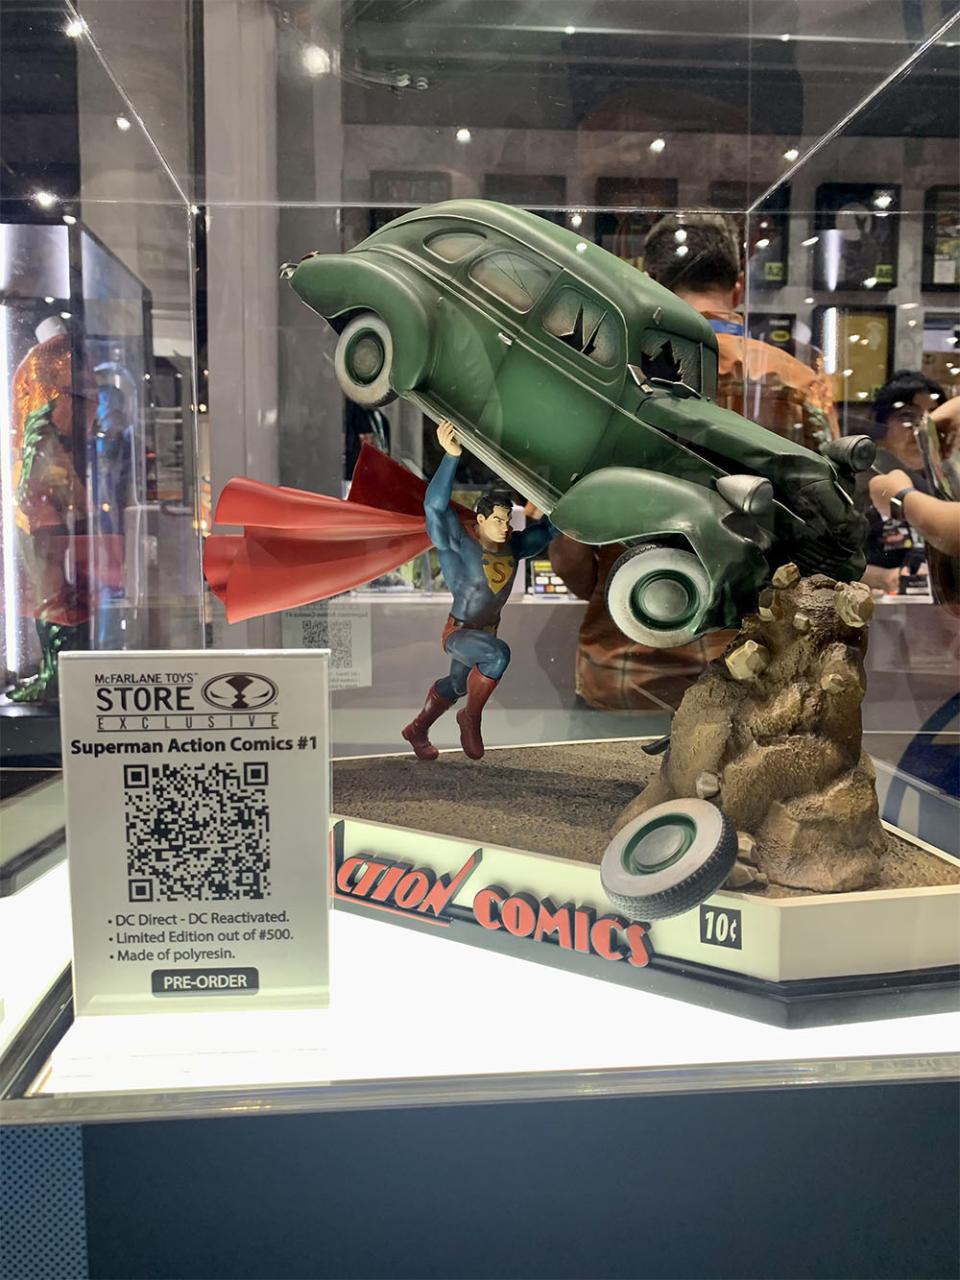 One of the limited statues for sale, this one modeled after the cover of Action Comics no. 1.